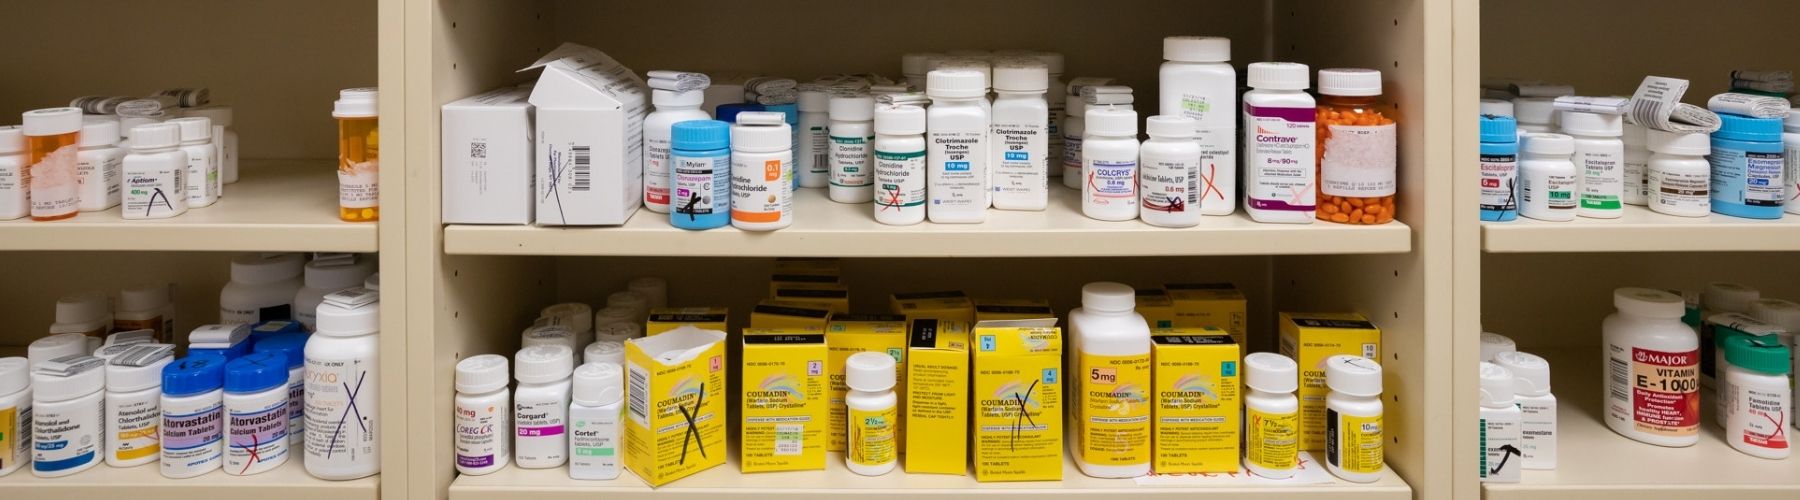 A closeup of shelving with many different medicines on display.